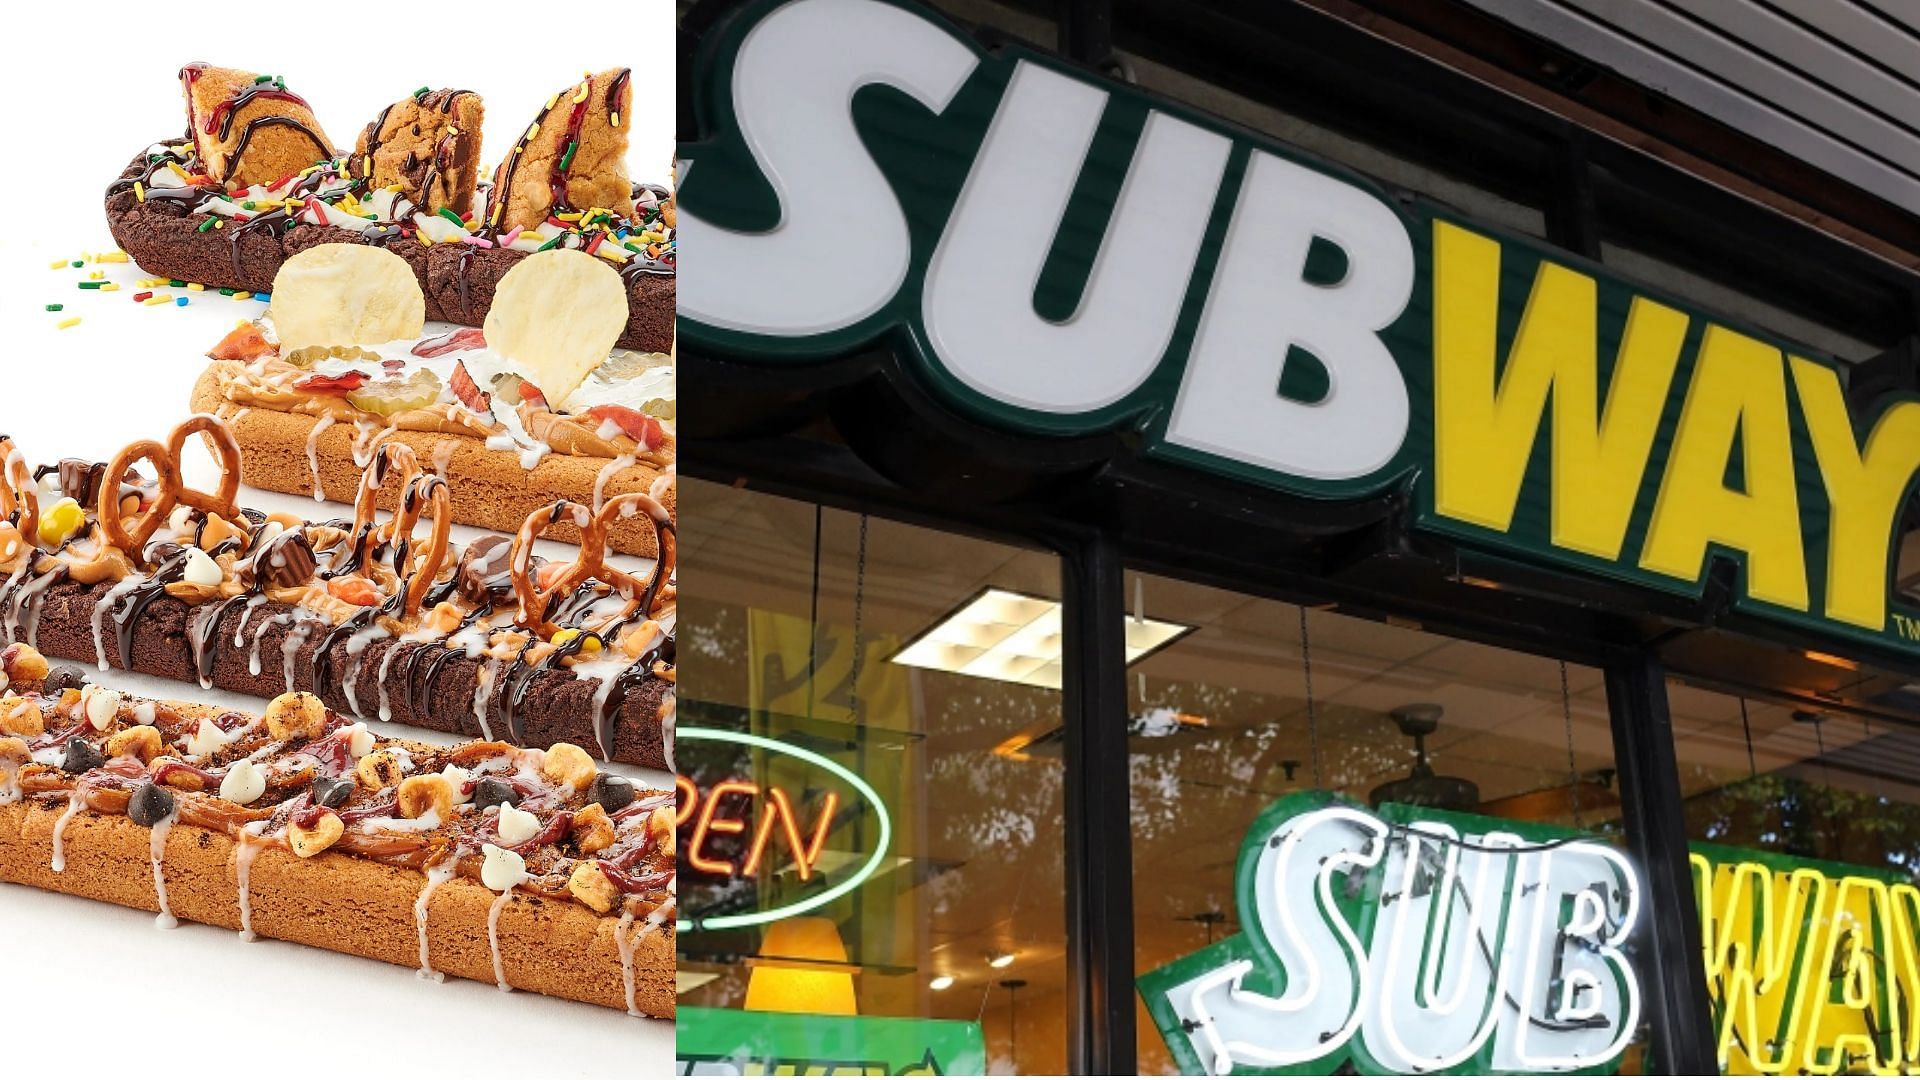 exterior of a Subway restaurant in Miami, Florida and Subway